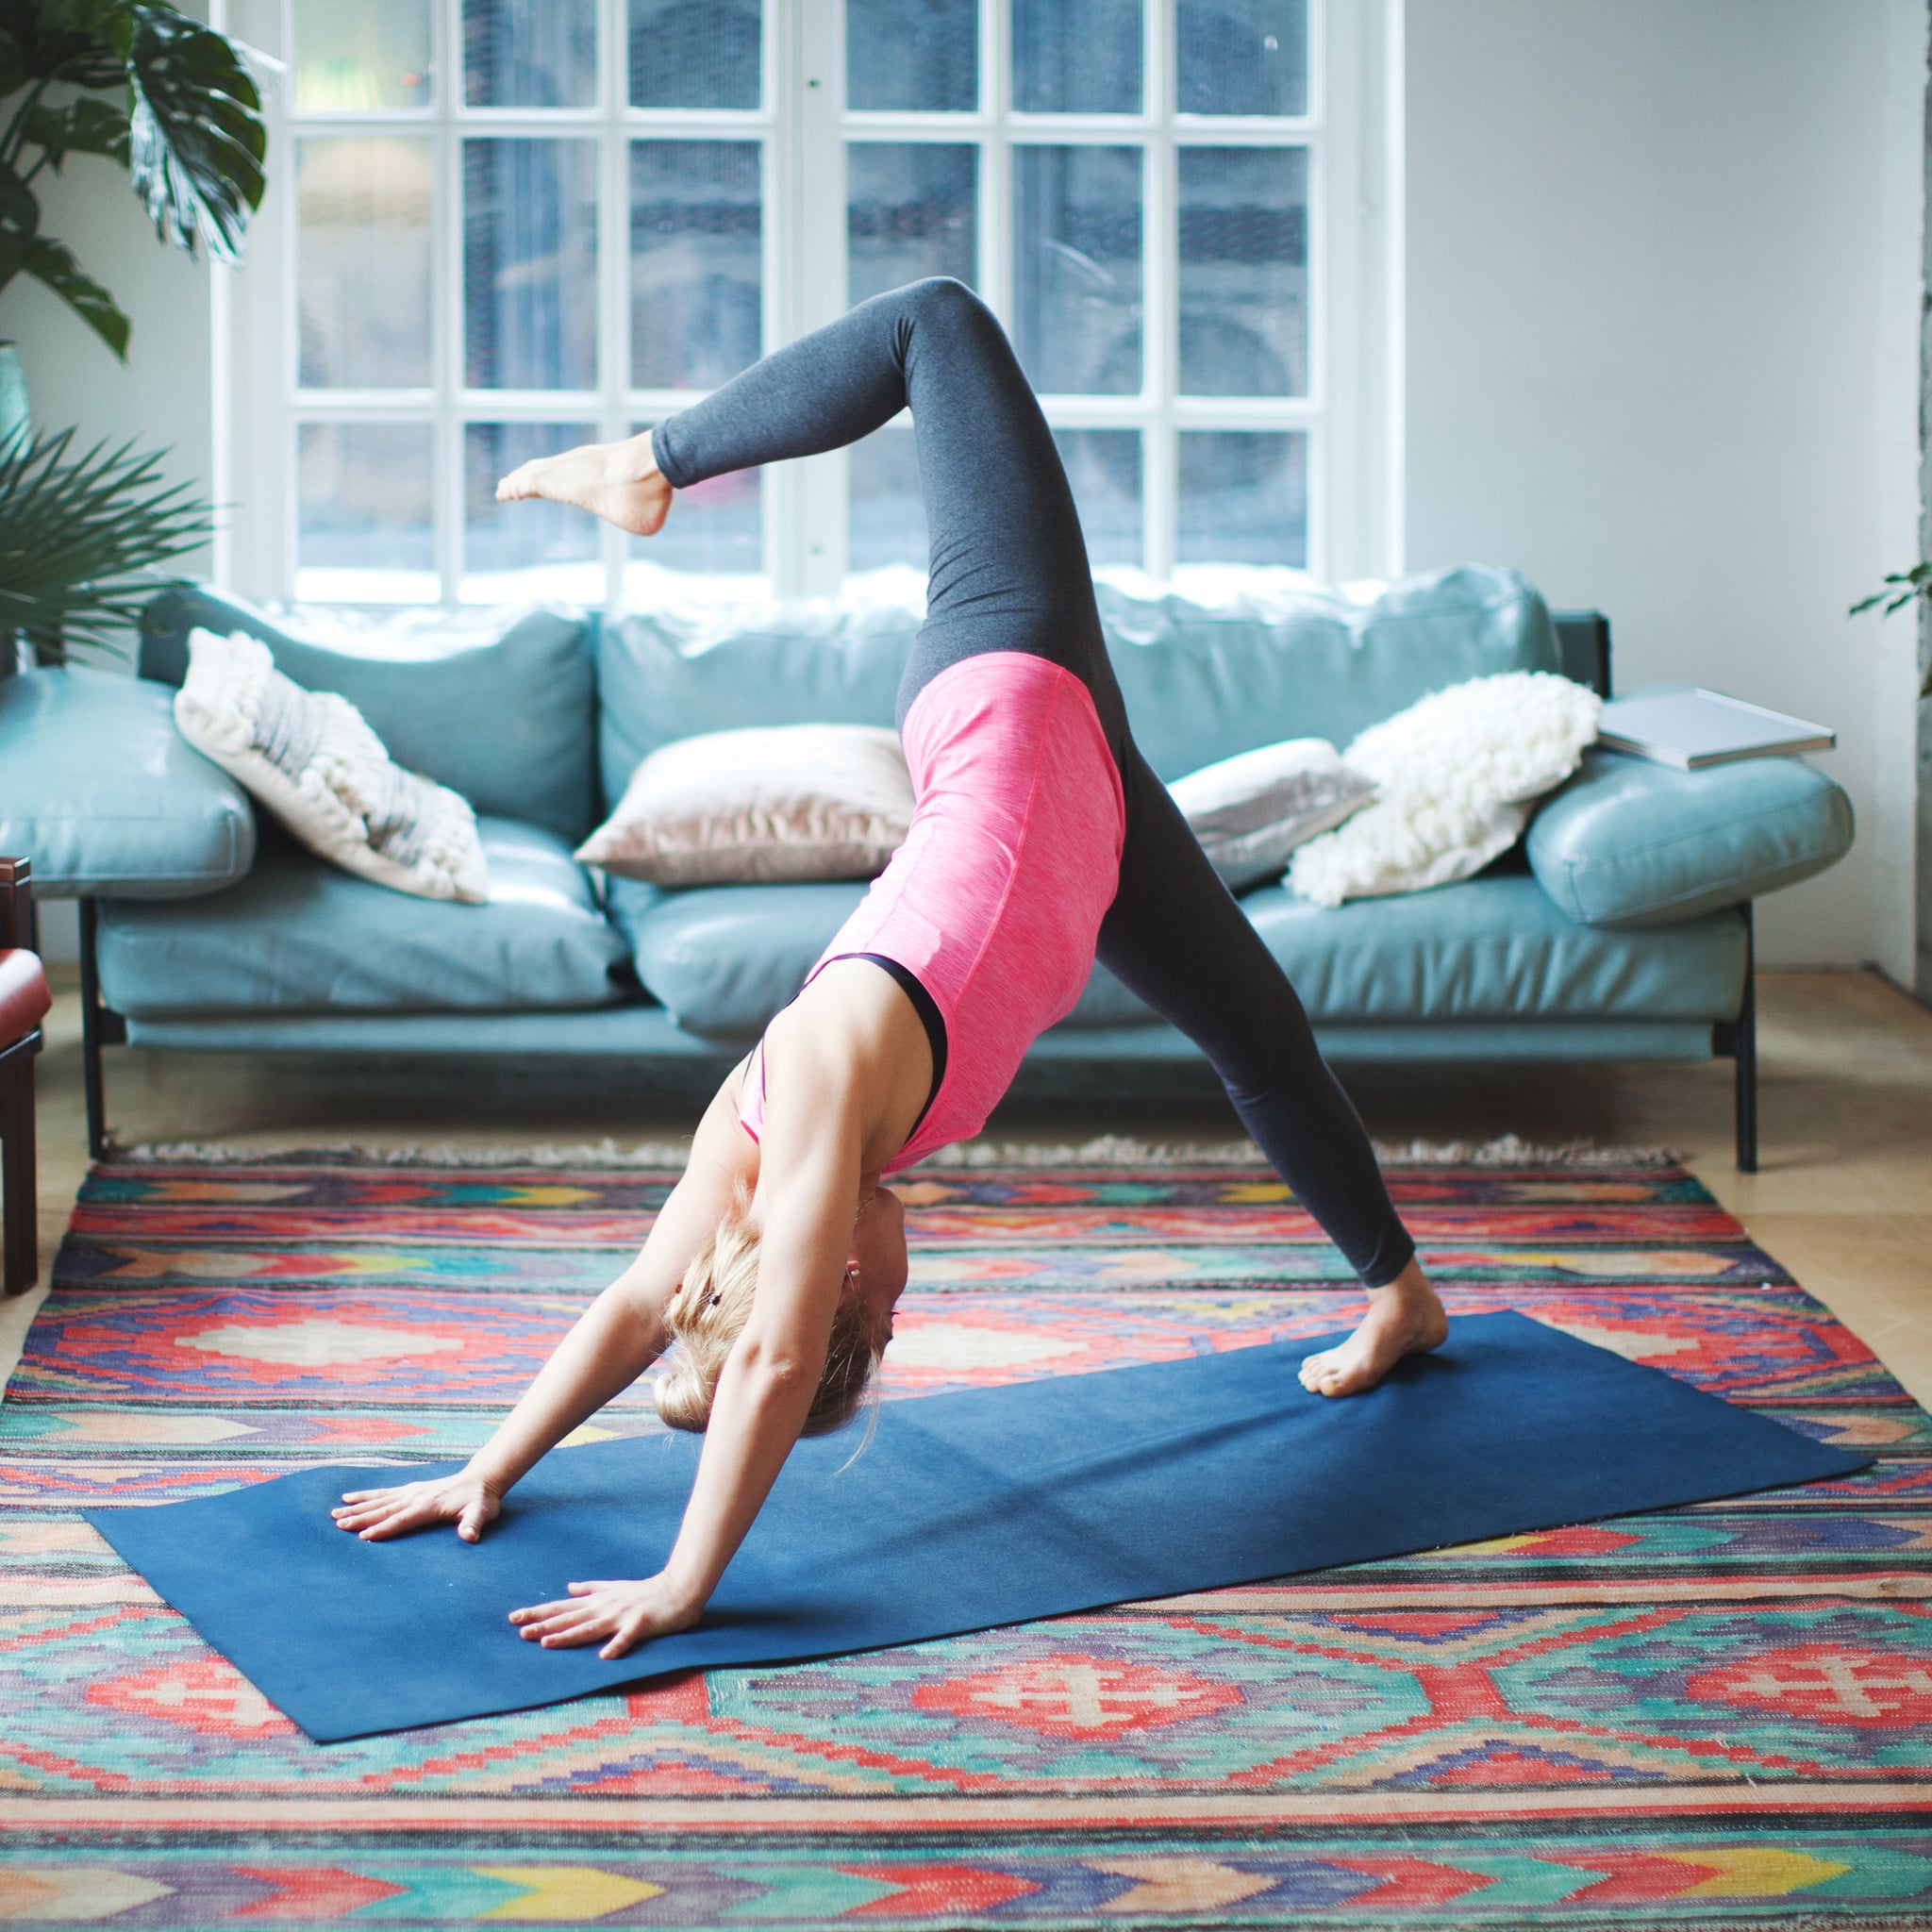 3 BASIC YOGA WARM UP IN UPPER BODY | Gallery posted by Alea Bianca | Lemon8